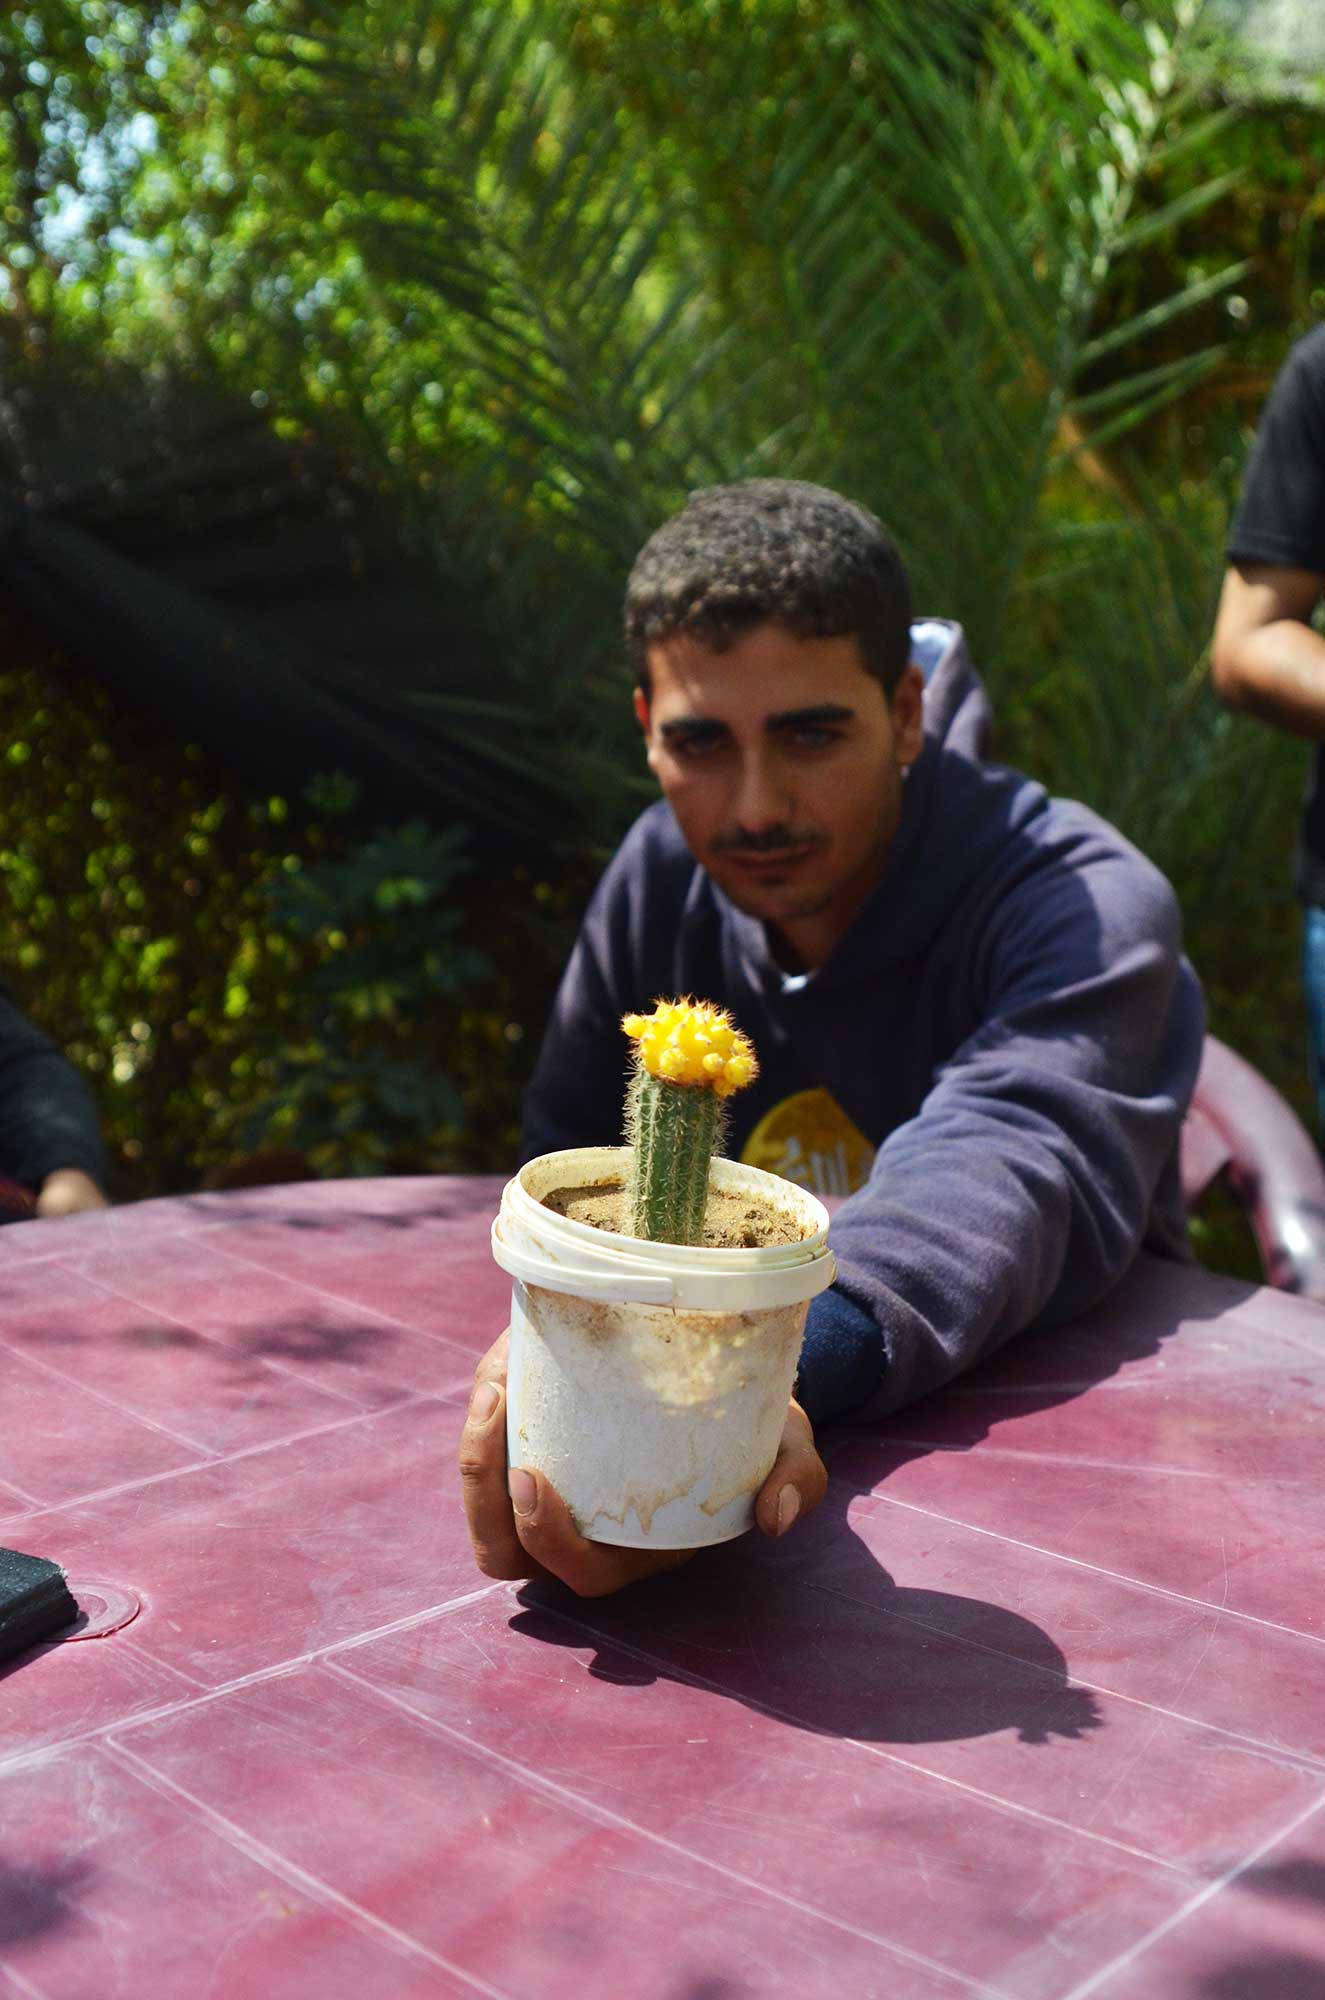 Gaza water shortage doesn't stop Saed's home garden from growing with help from a new water well.